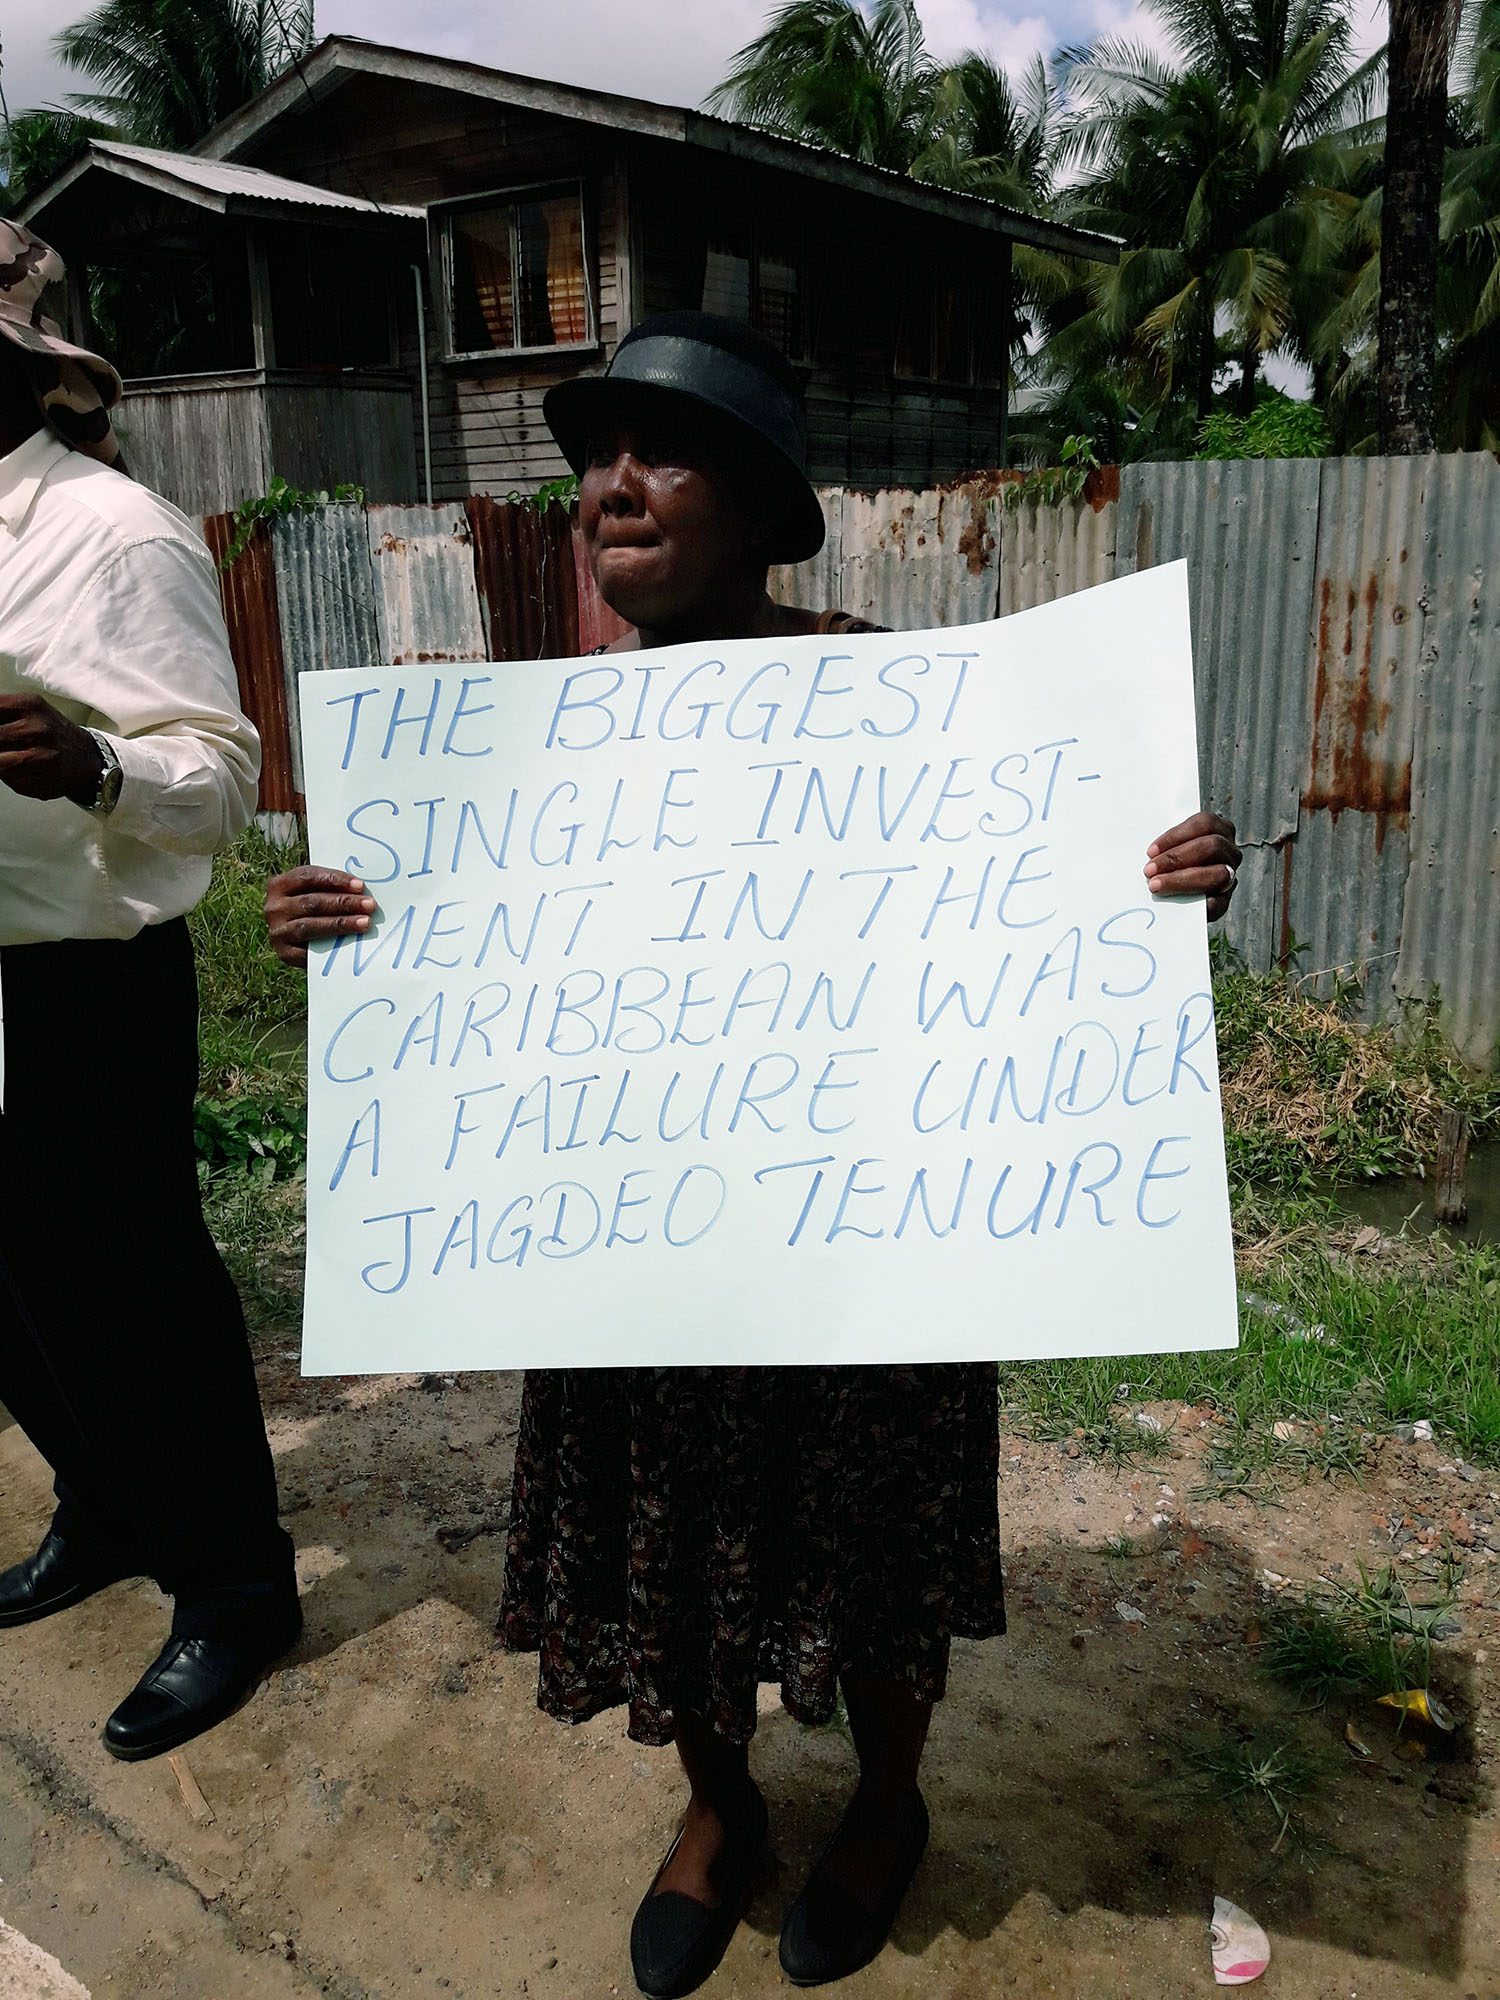 One of the placards at the protest